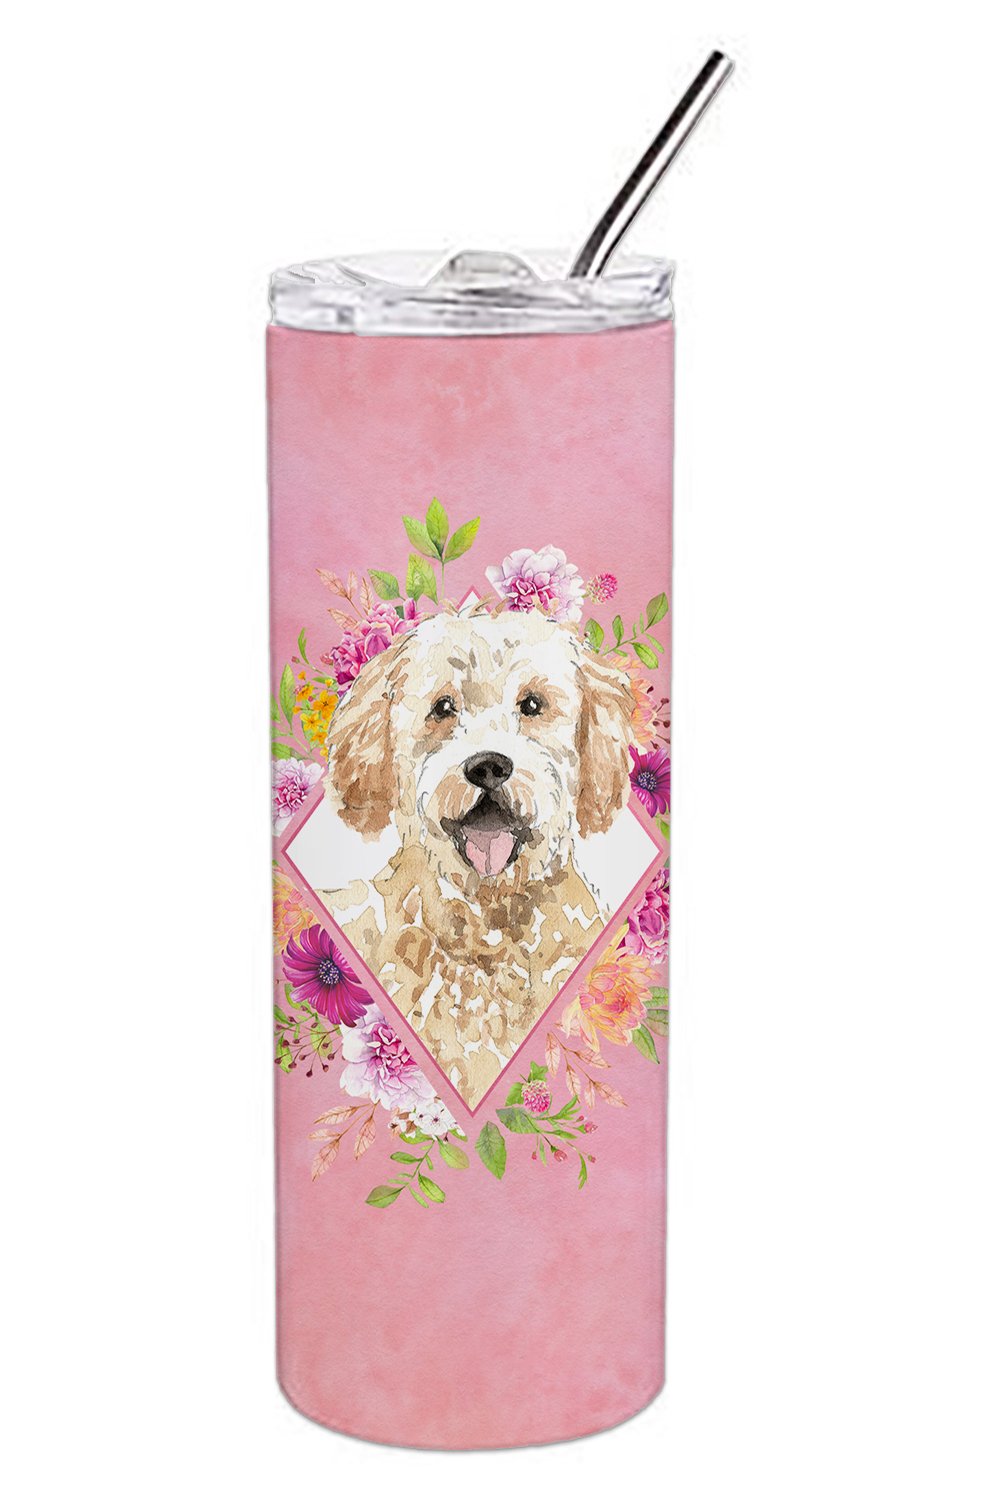 Goldendoodle Pink Flowers Double Walled Stainless Steel 20 oz Skinny Tumbler CK4236TBL20 by Caroline's Treasures